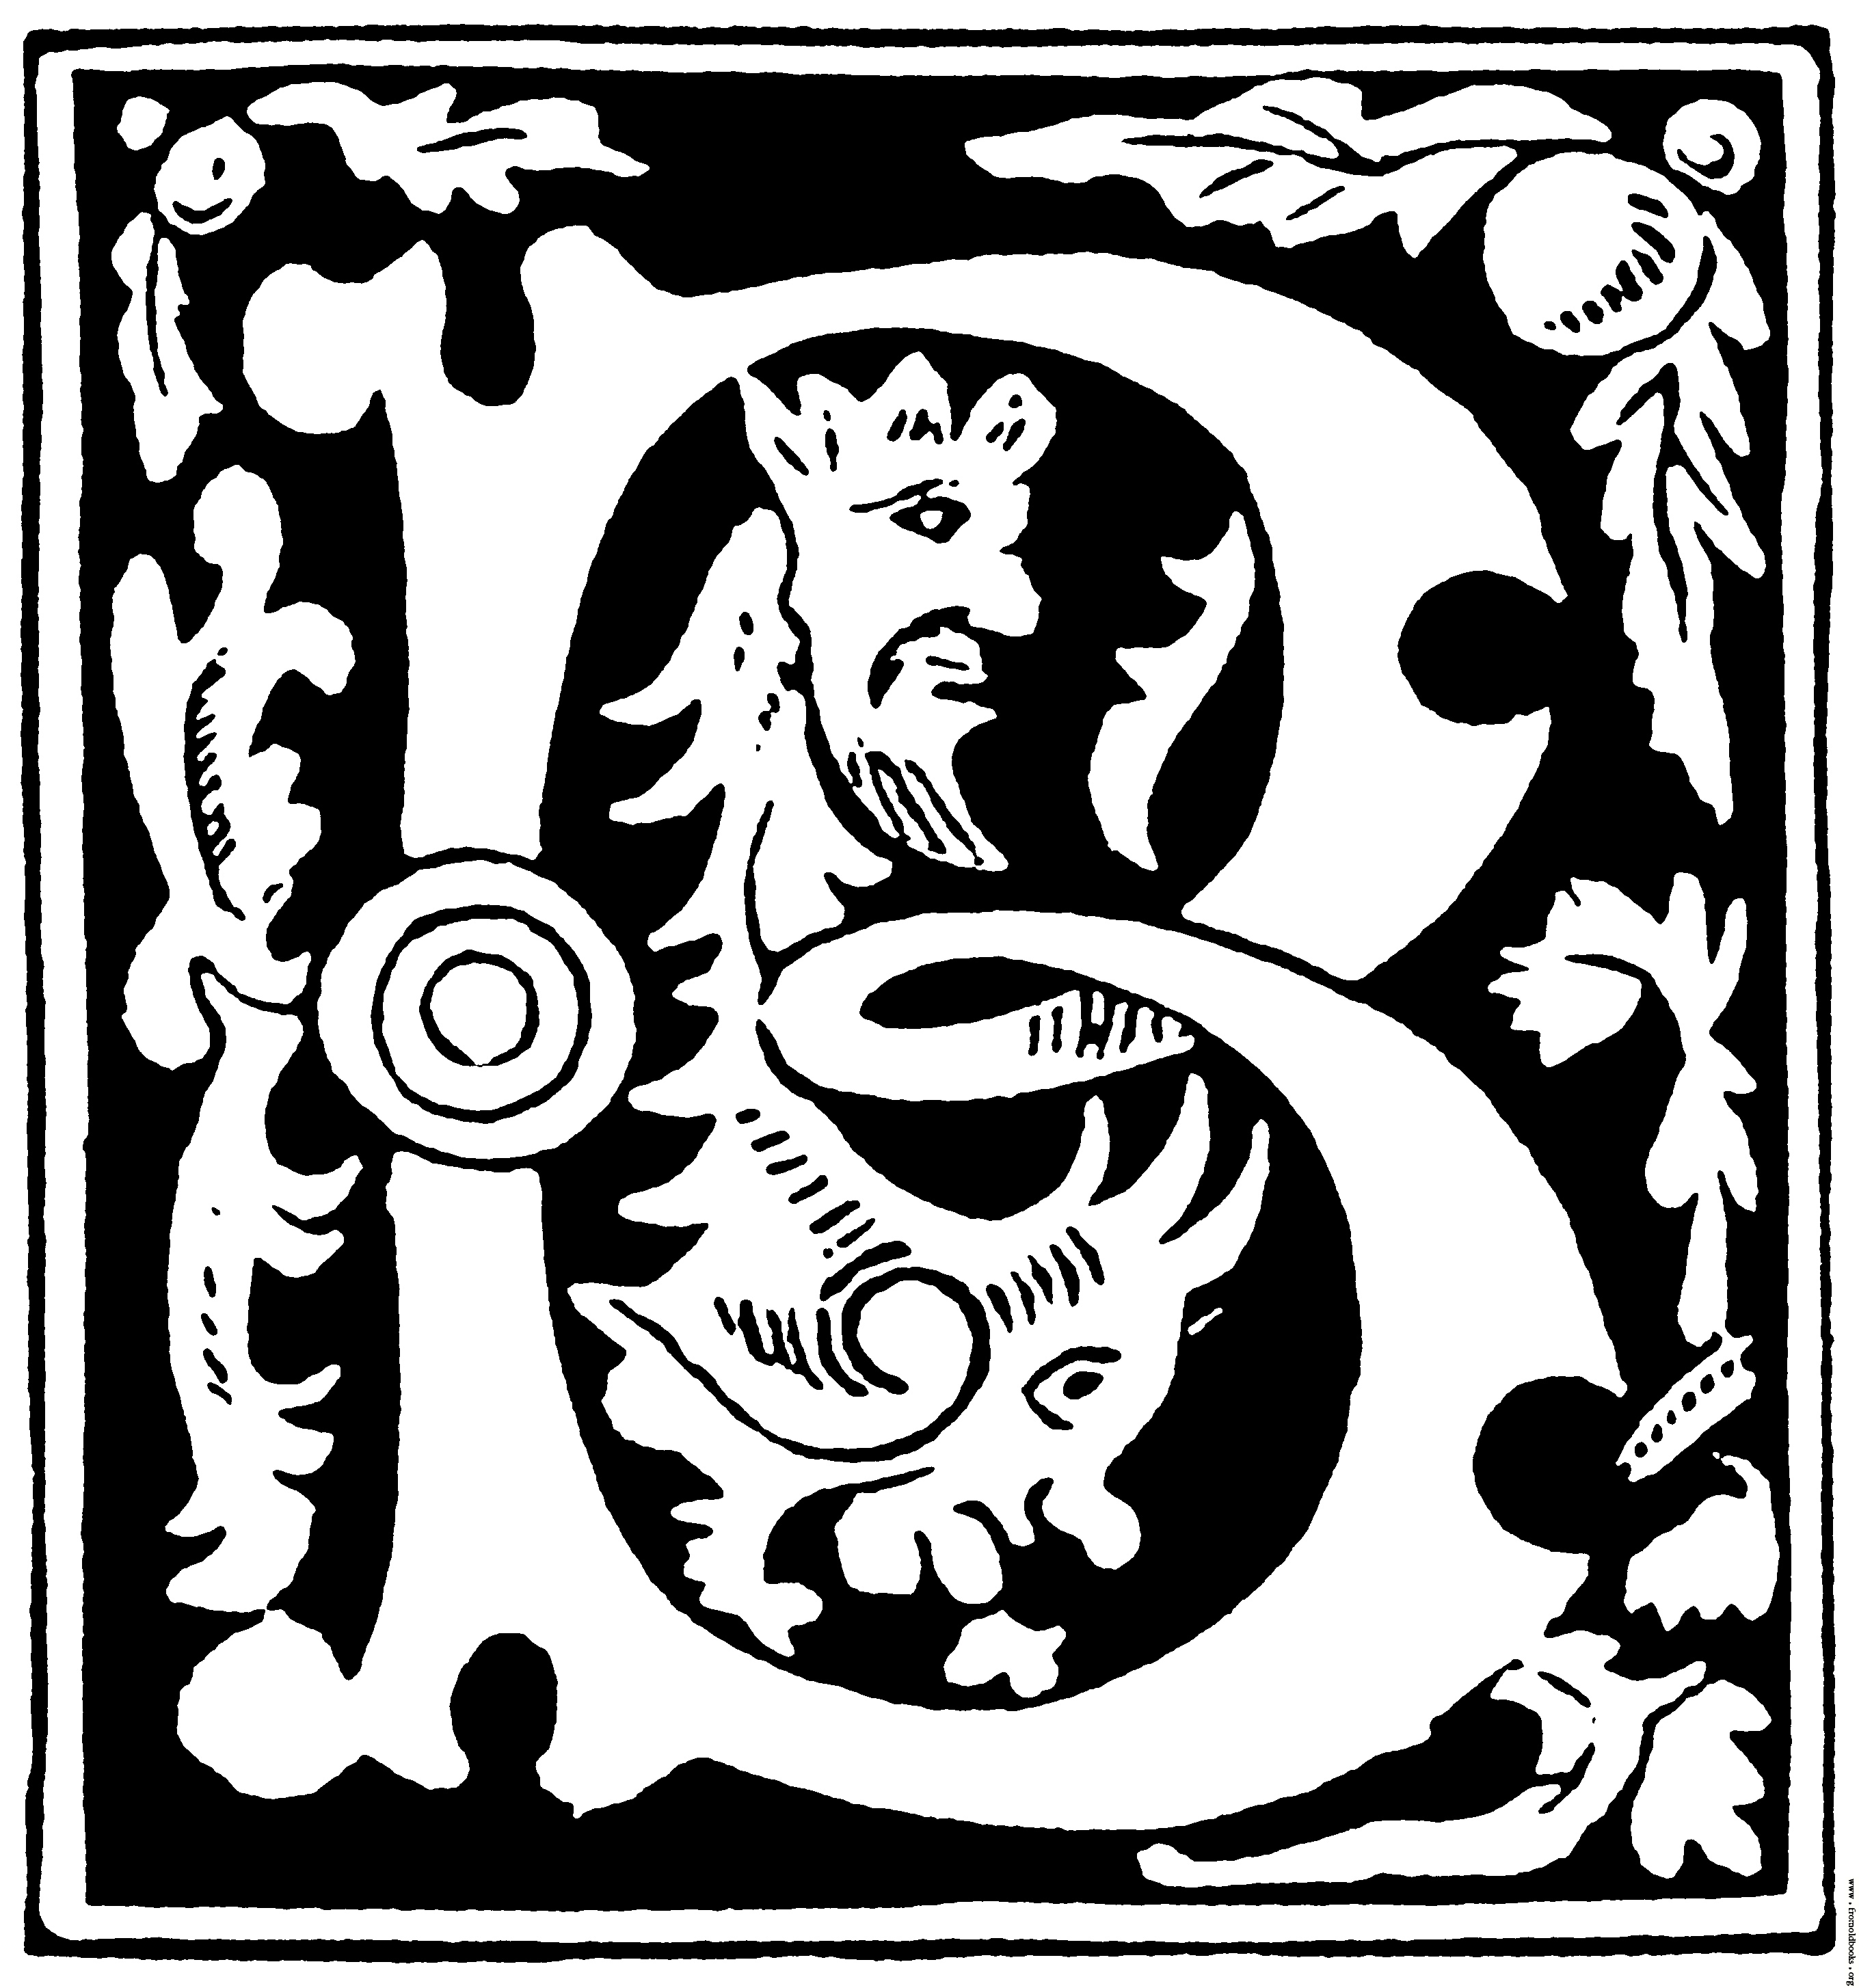 Decorative initial letter “B” from 16th Century